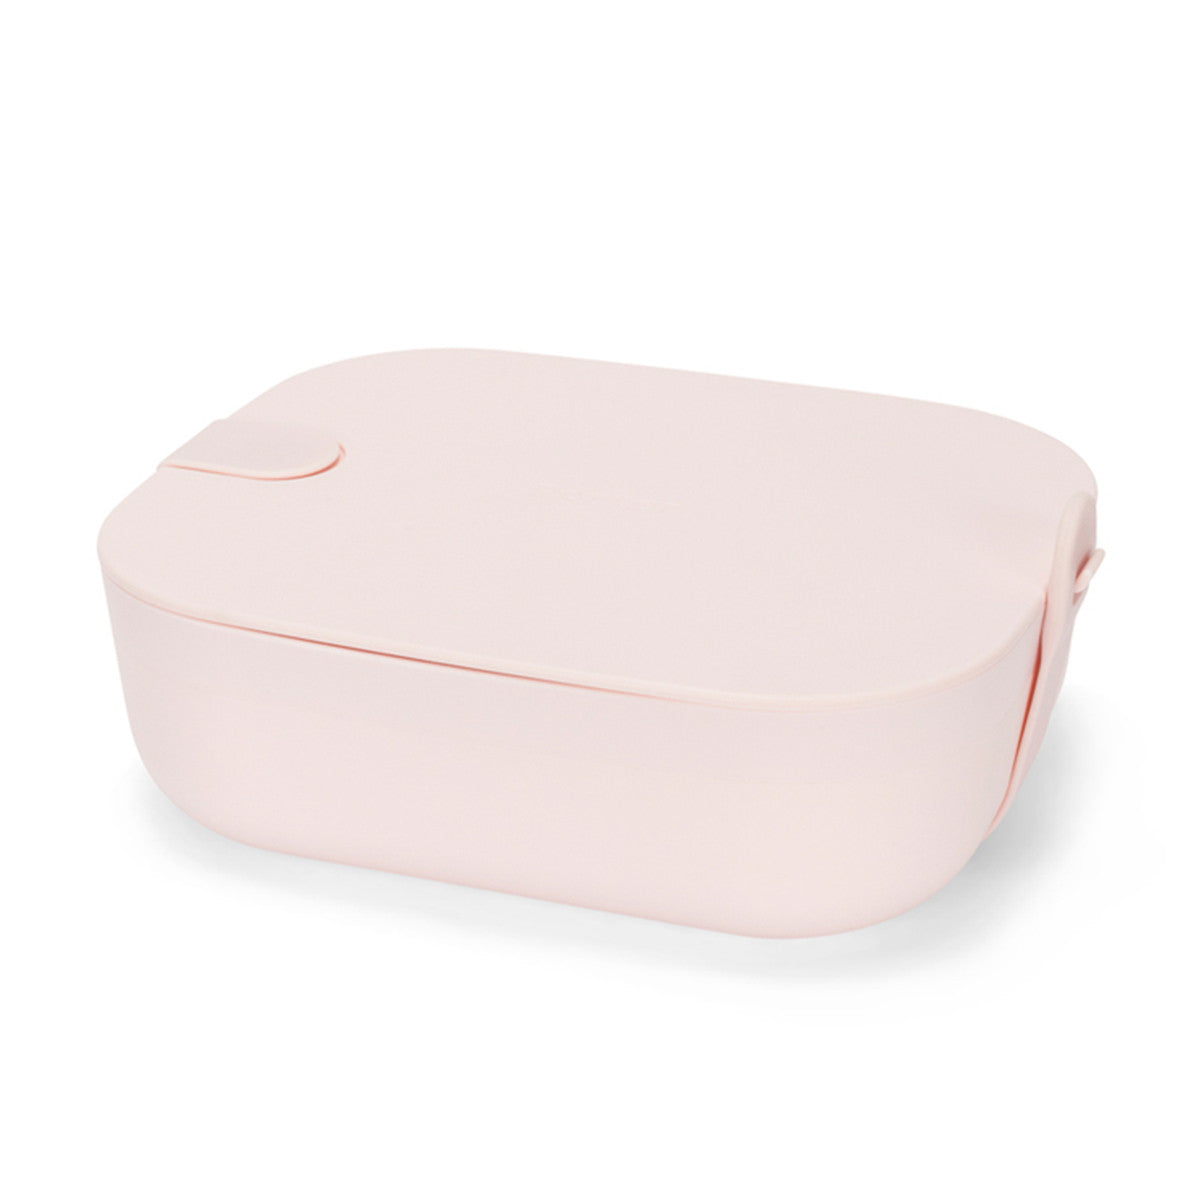 Lunch Boxes – PW Catalog